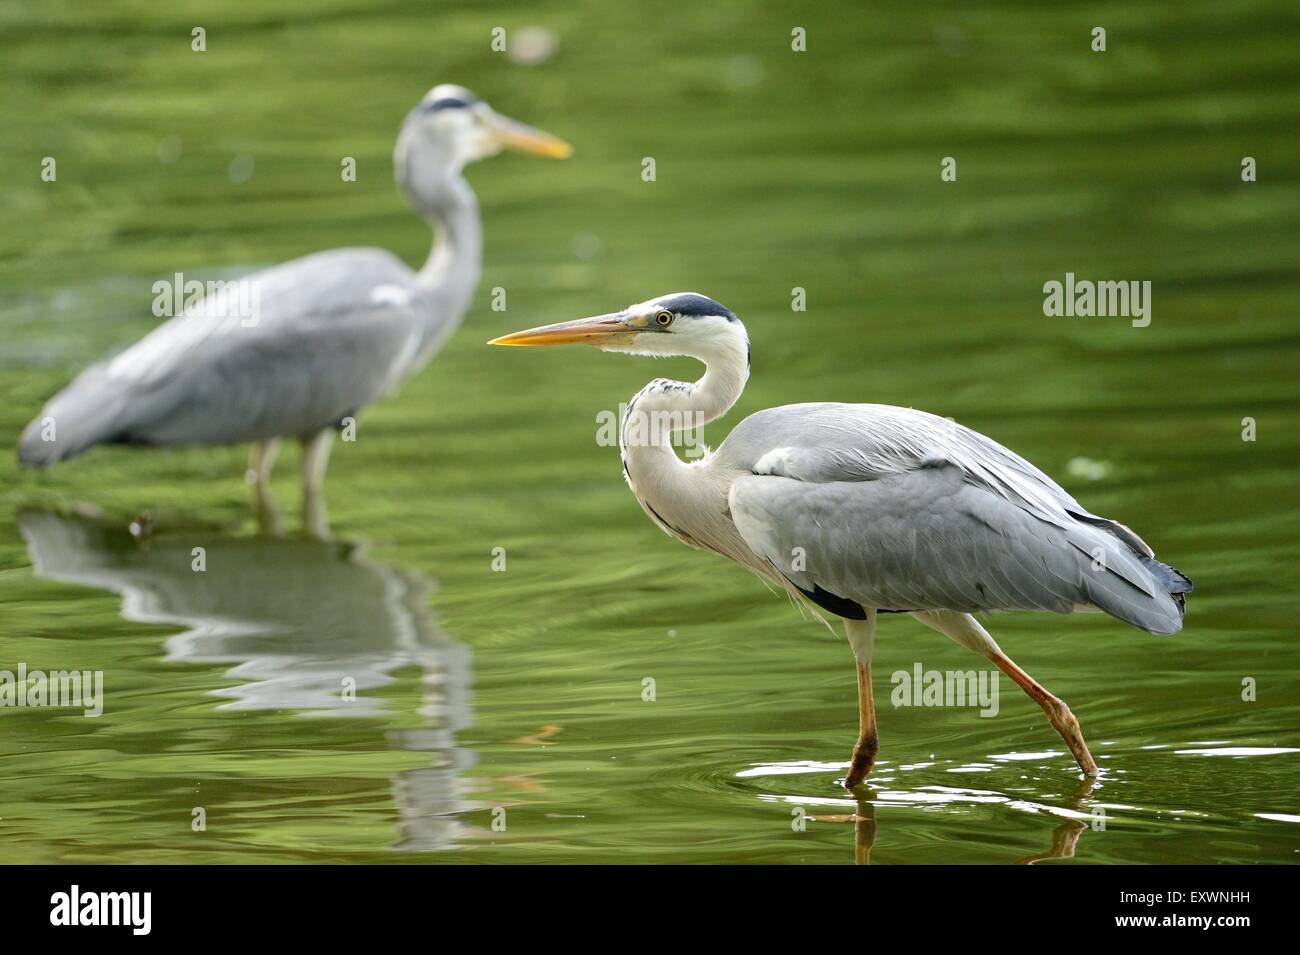 Two gray herons standing in water Stock Photo